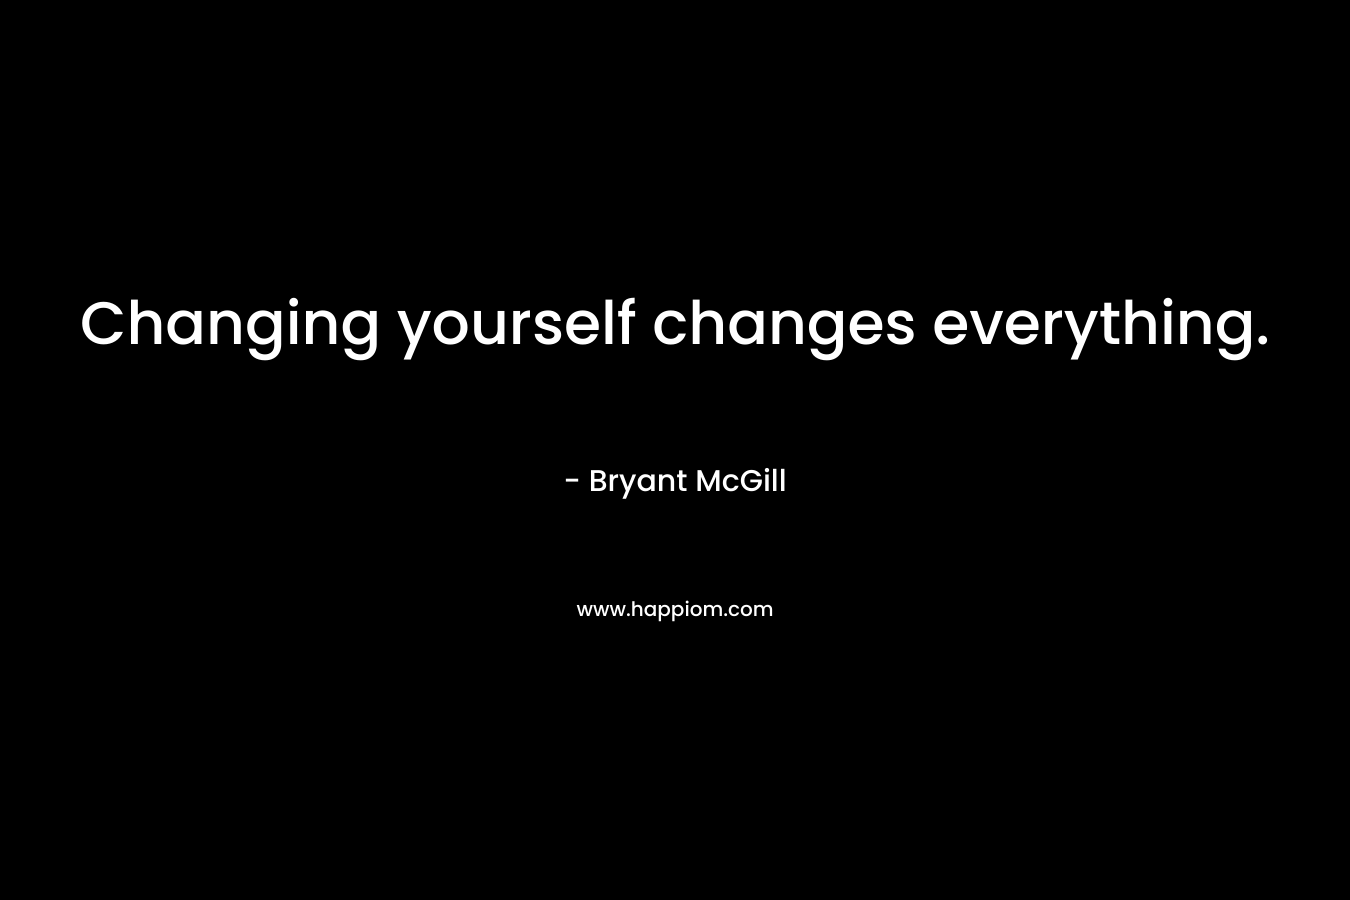 Changing yourself changes everything.